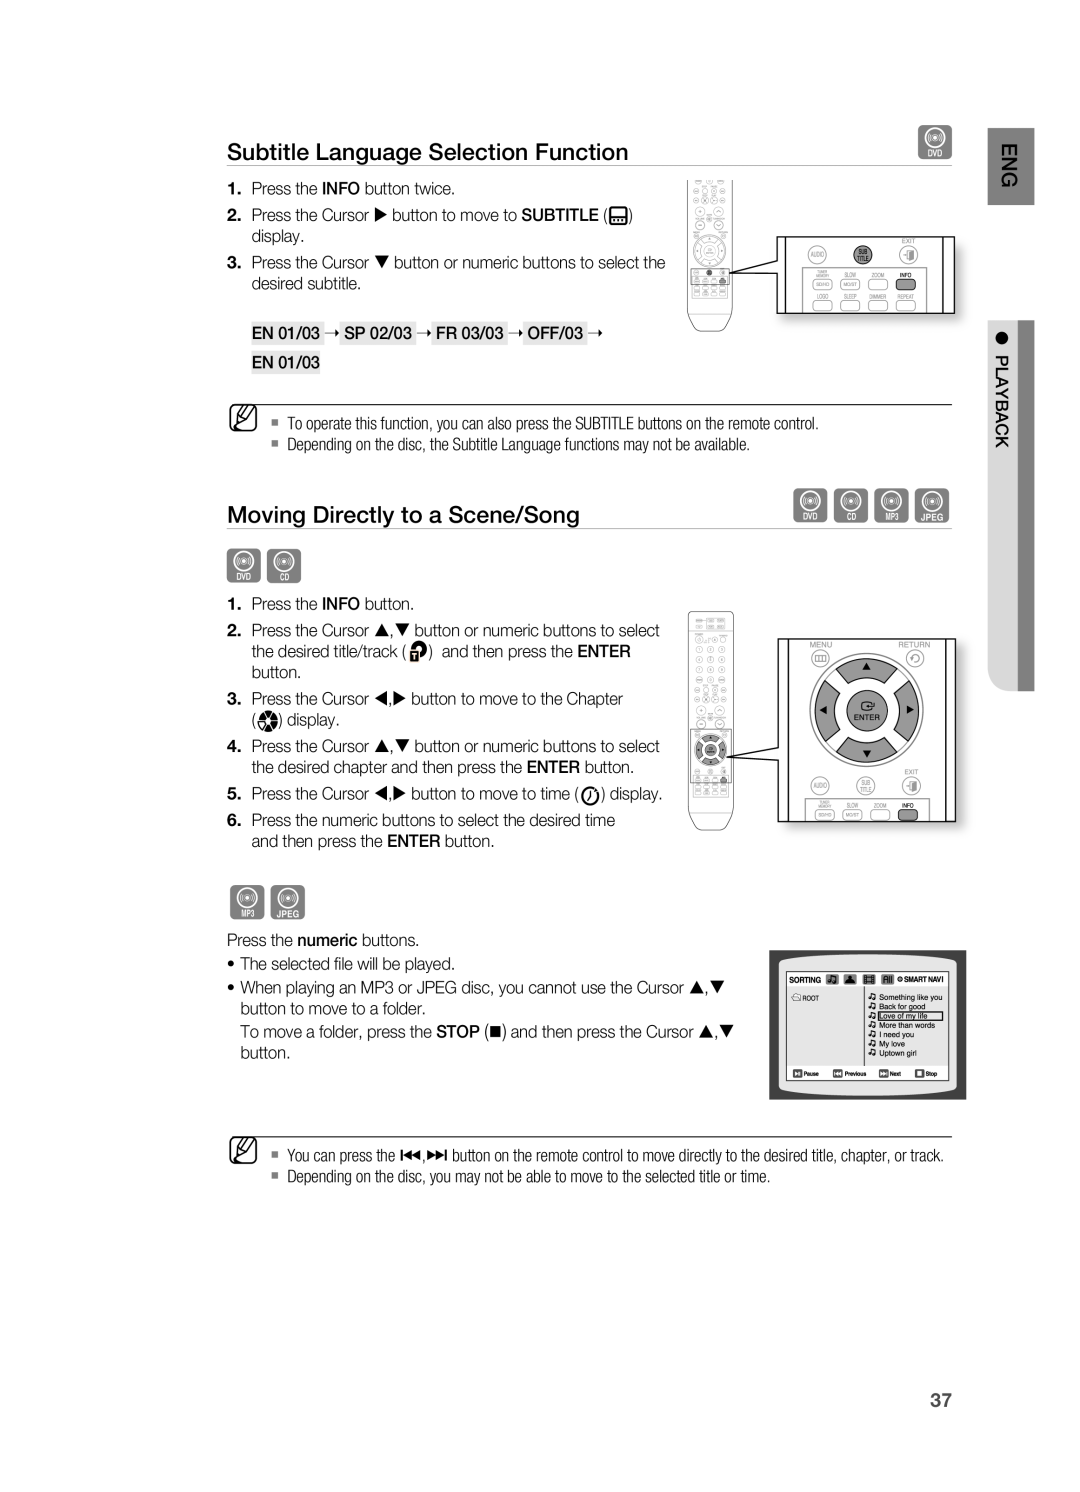 Sony HT-X810 user manual Subtitle language Selection Function, Moving Directly to a Scene/Song 